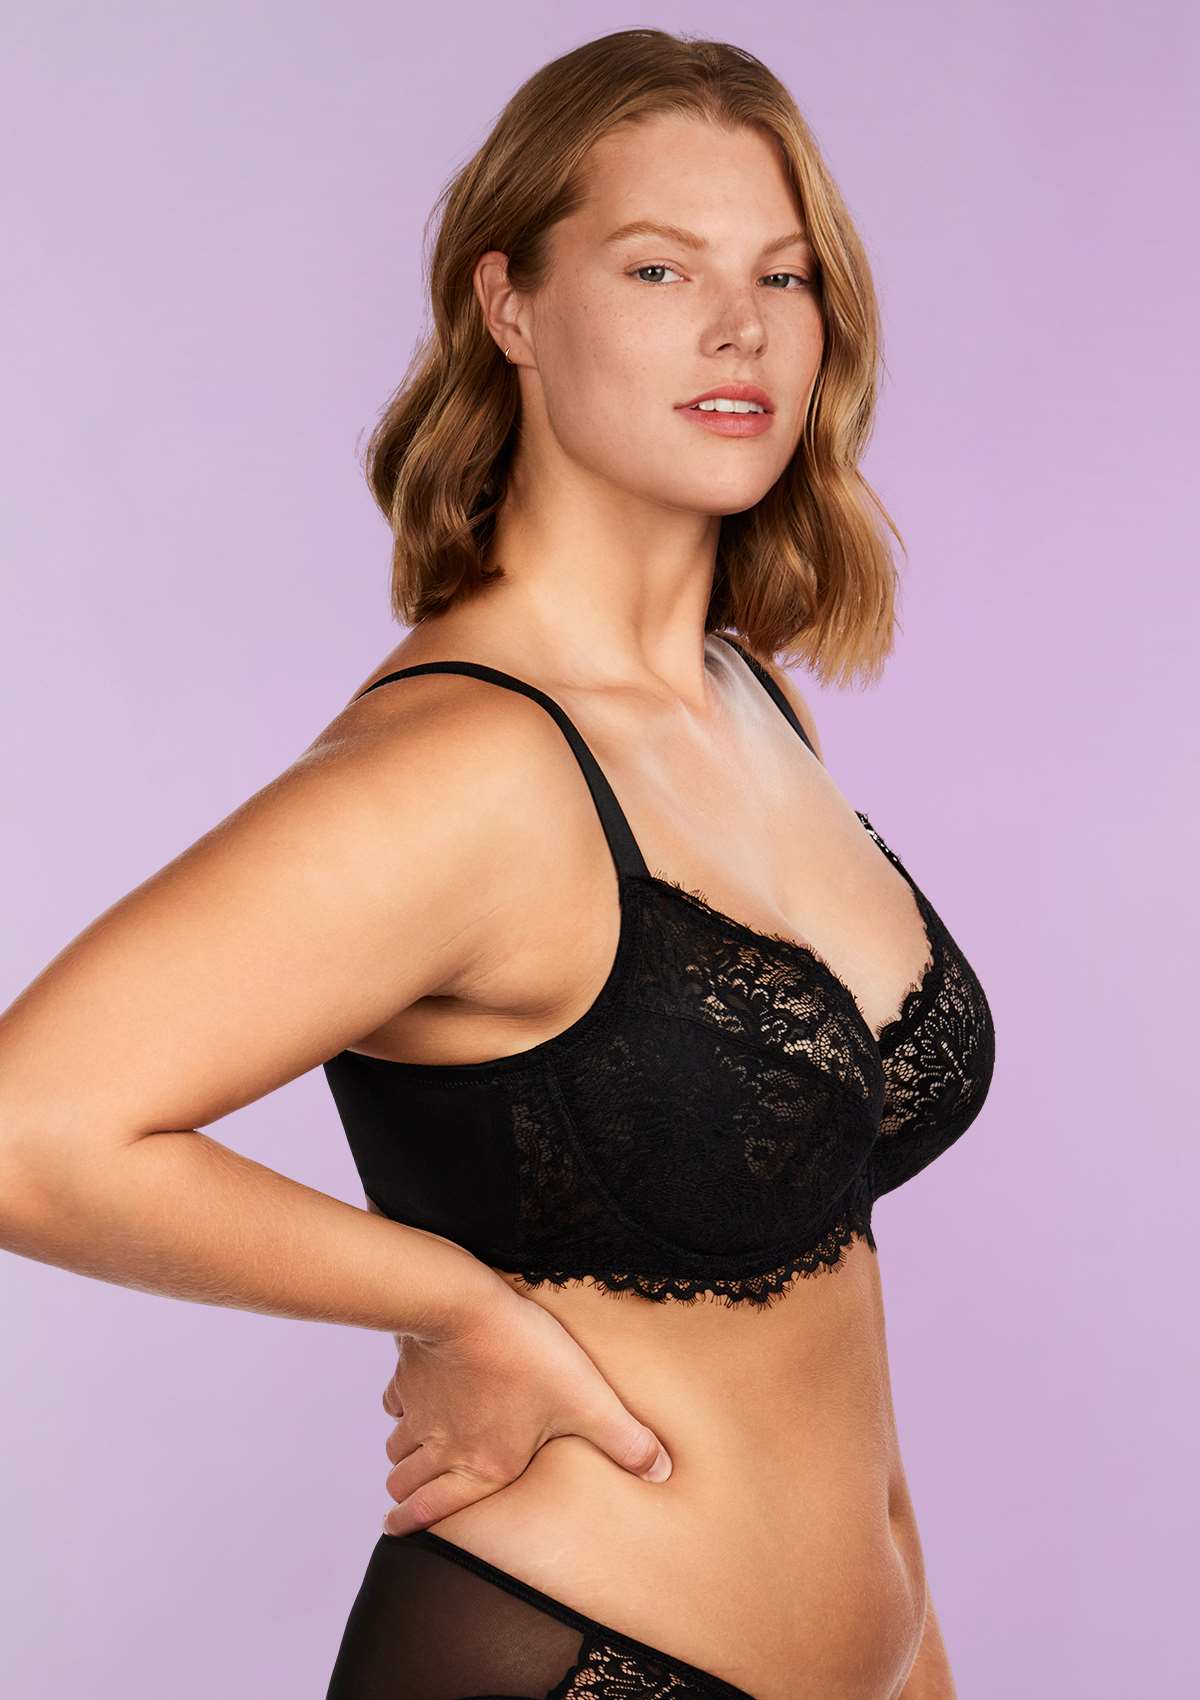 HSIA Sunflower Underwire Lace Bra: Unlined Full Coverage Support Bra - Black / 40 / D